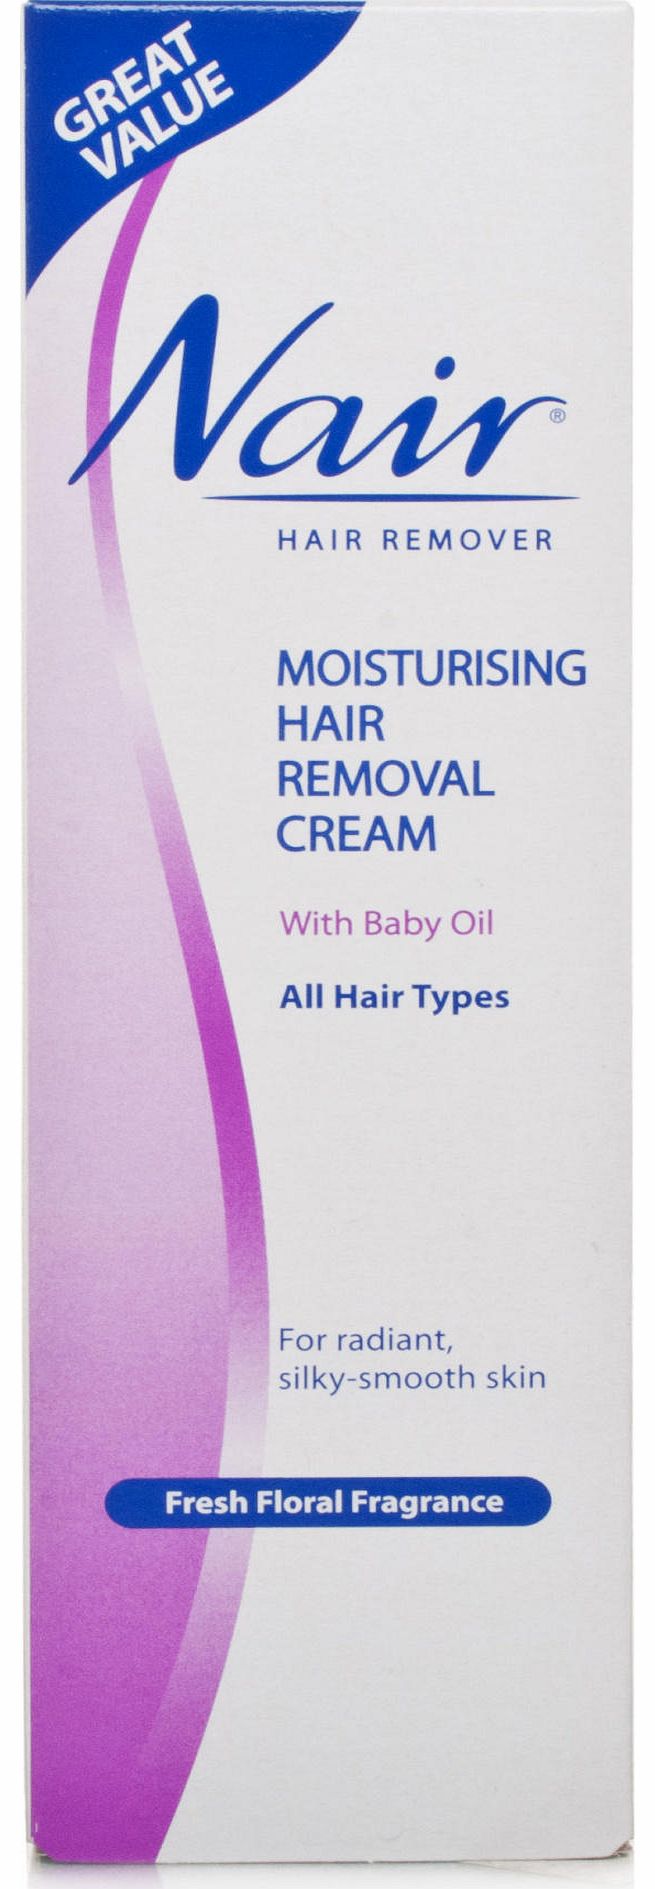 Moisturising Hair Removal Cream with Baby Oil